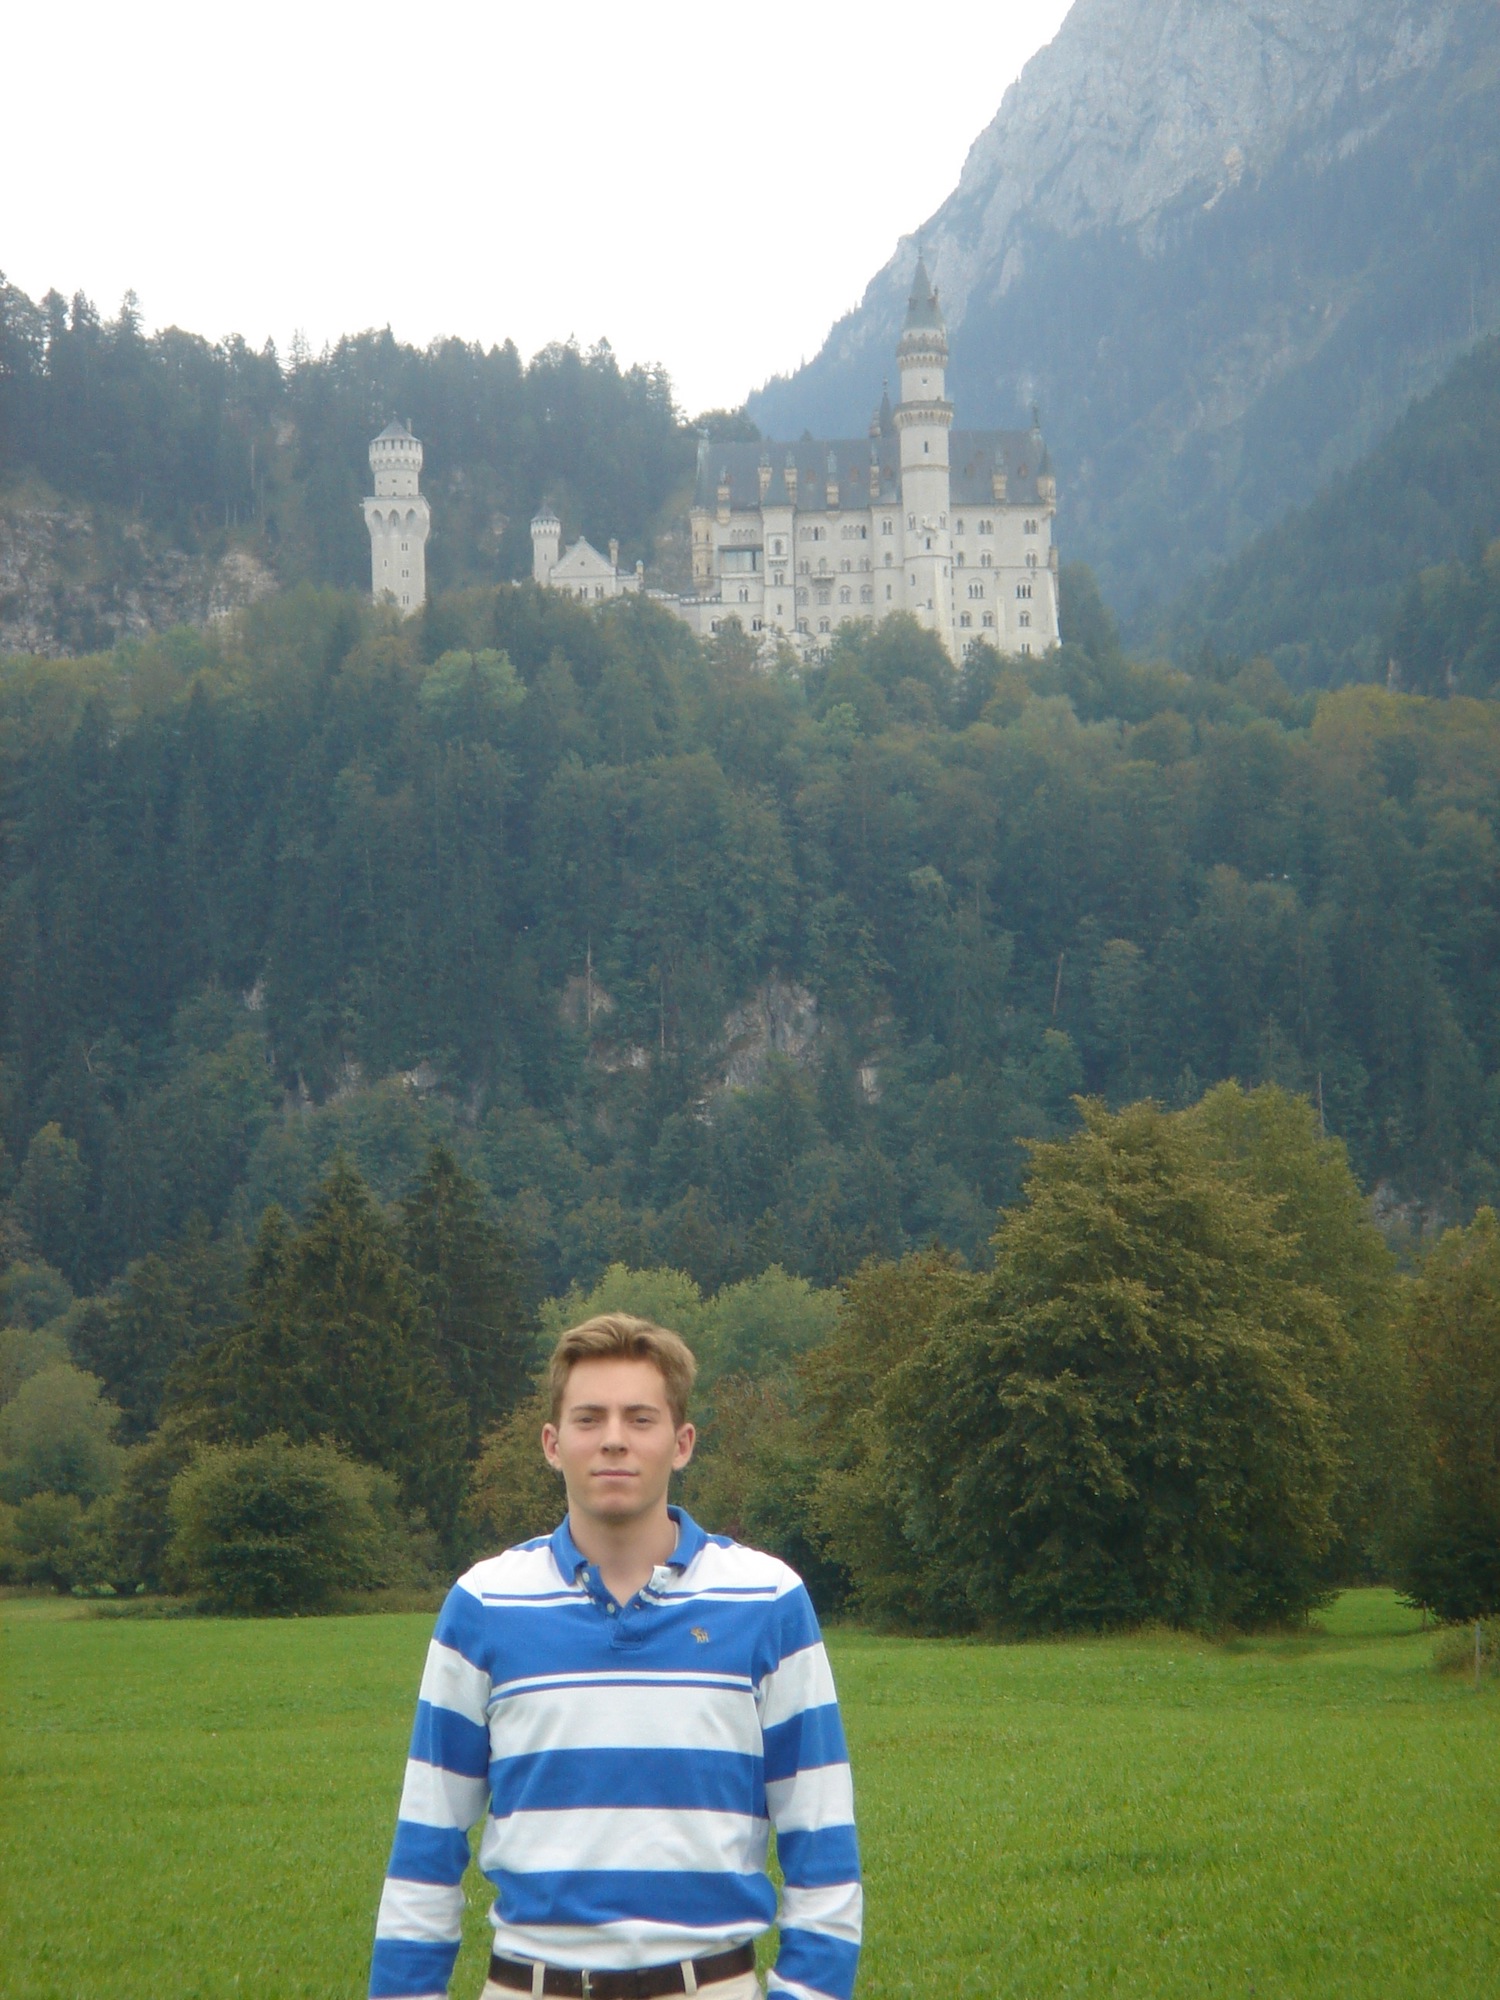 a man standing in a field with a castle in the background